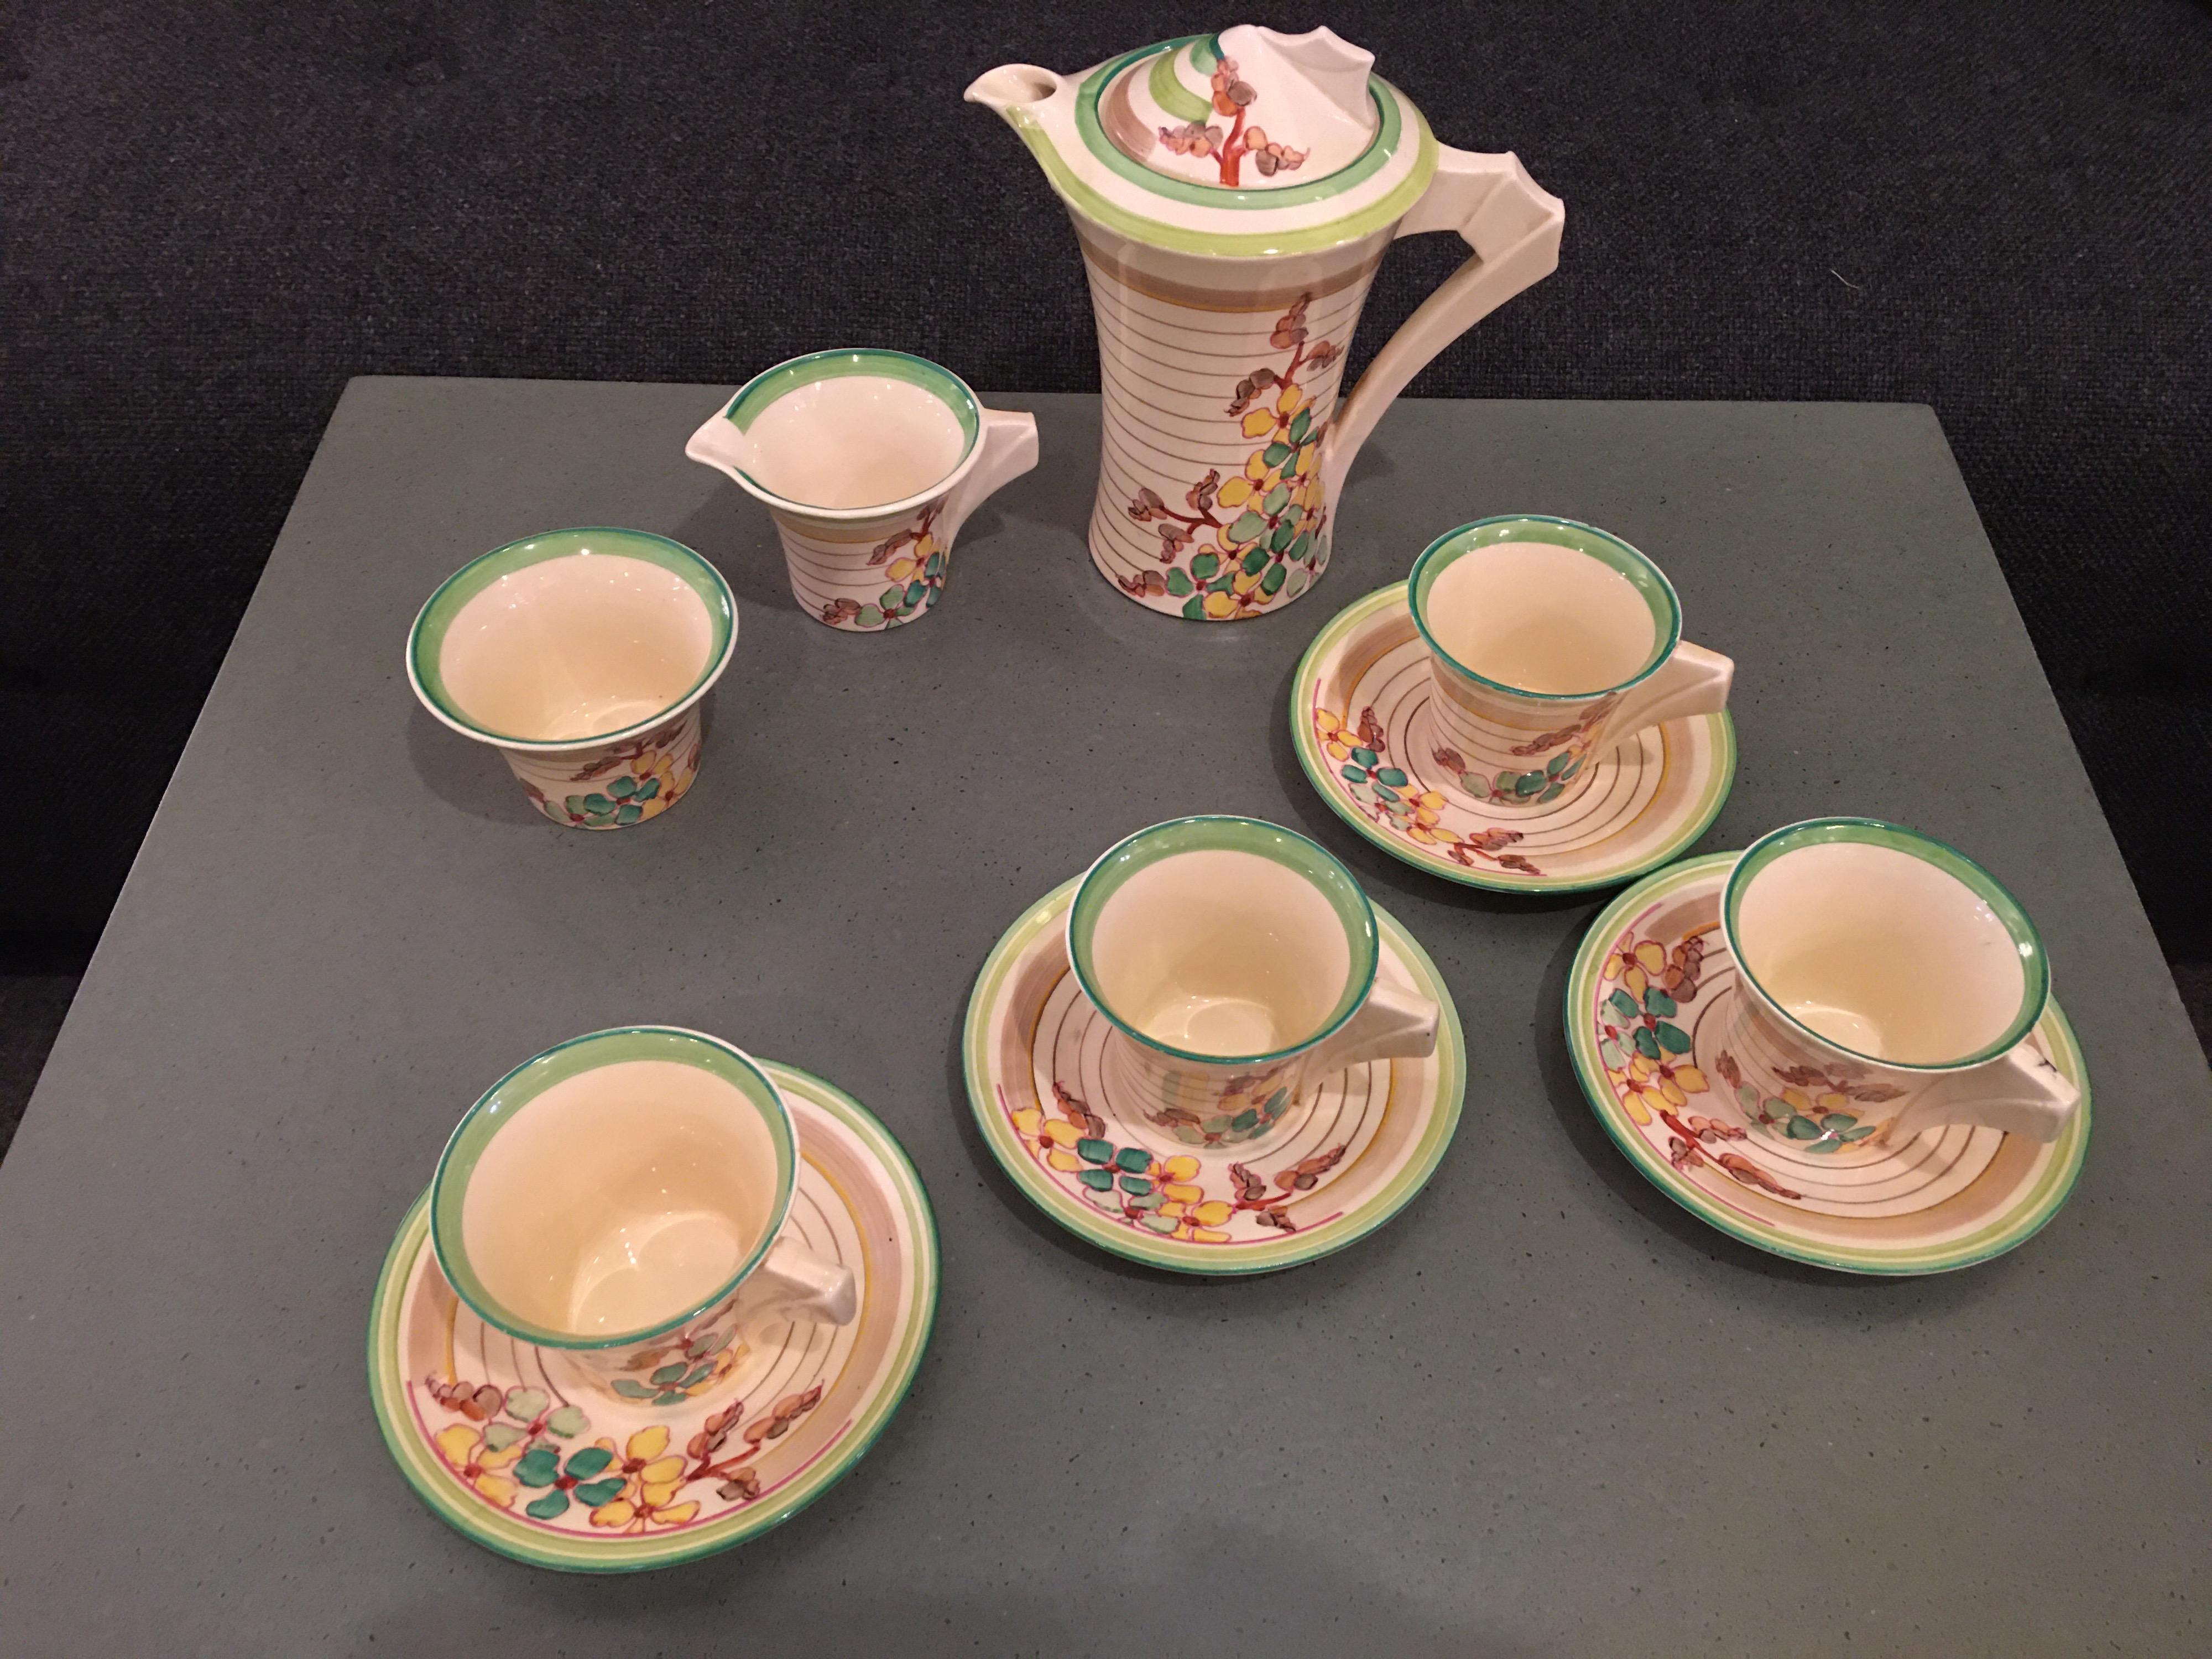 Clarice Cliff hand painted bizarre ware, marked made in England and Wilkinson England. Pattern is Green Hydrangea. Set includes coffee pot, cream and sugar bowls, 5 saucers and 5 cups. A few minor chips to rims etc. One cup has a hairline and coffee